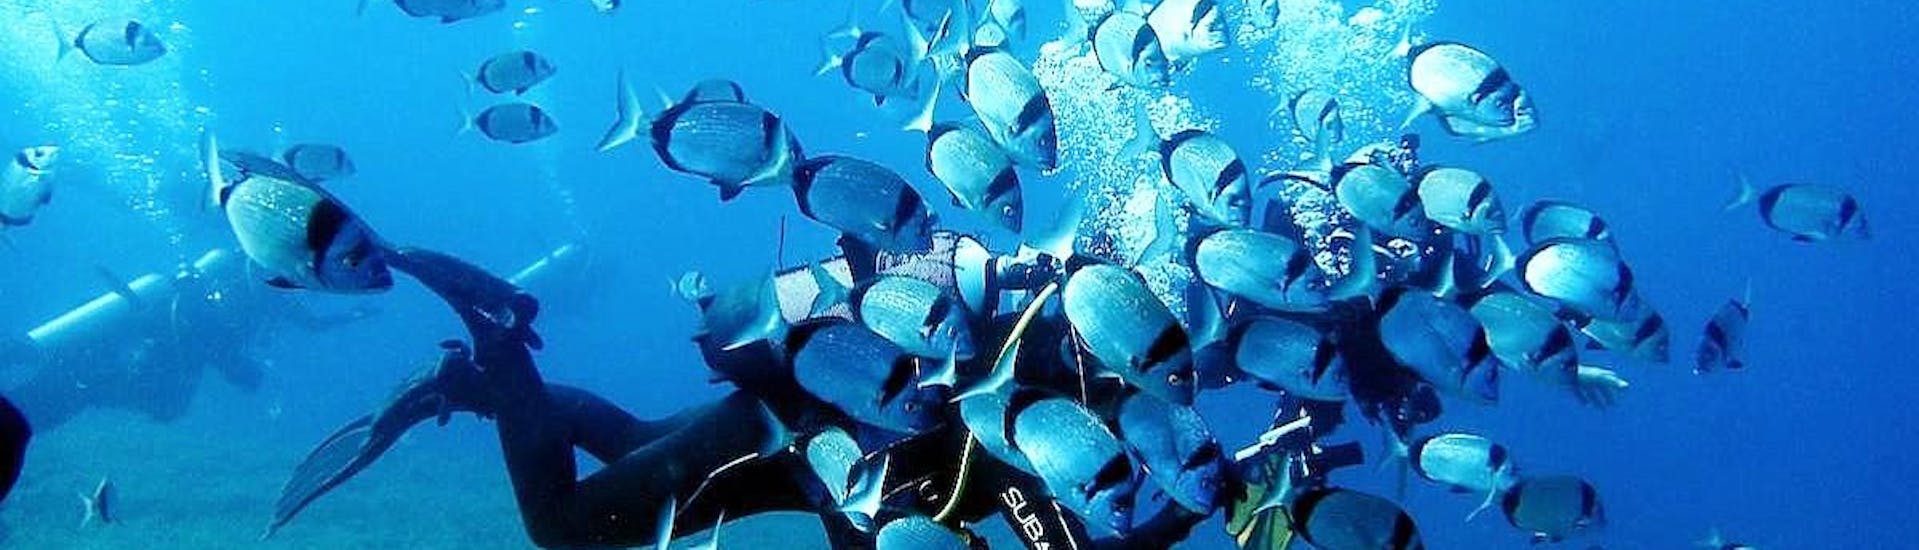 A diver surrounded by a school of fish during a dive with Cyprus Diving Adventure.